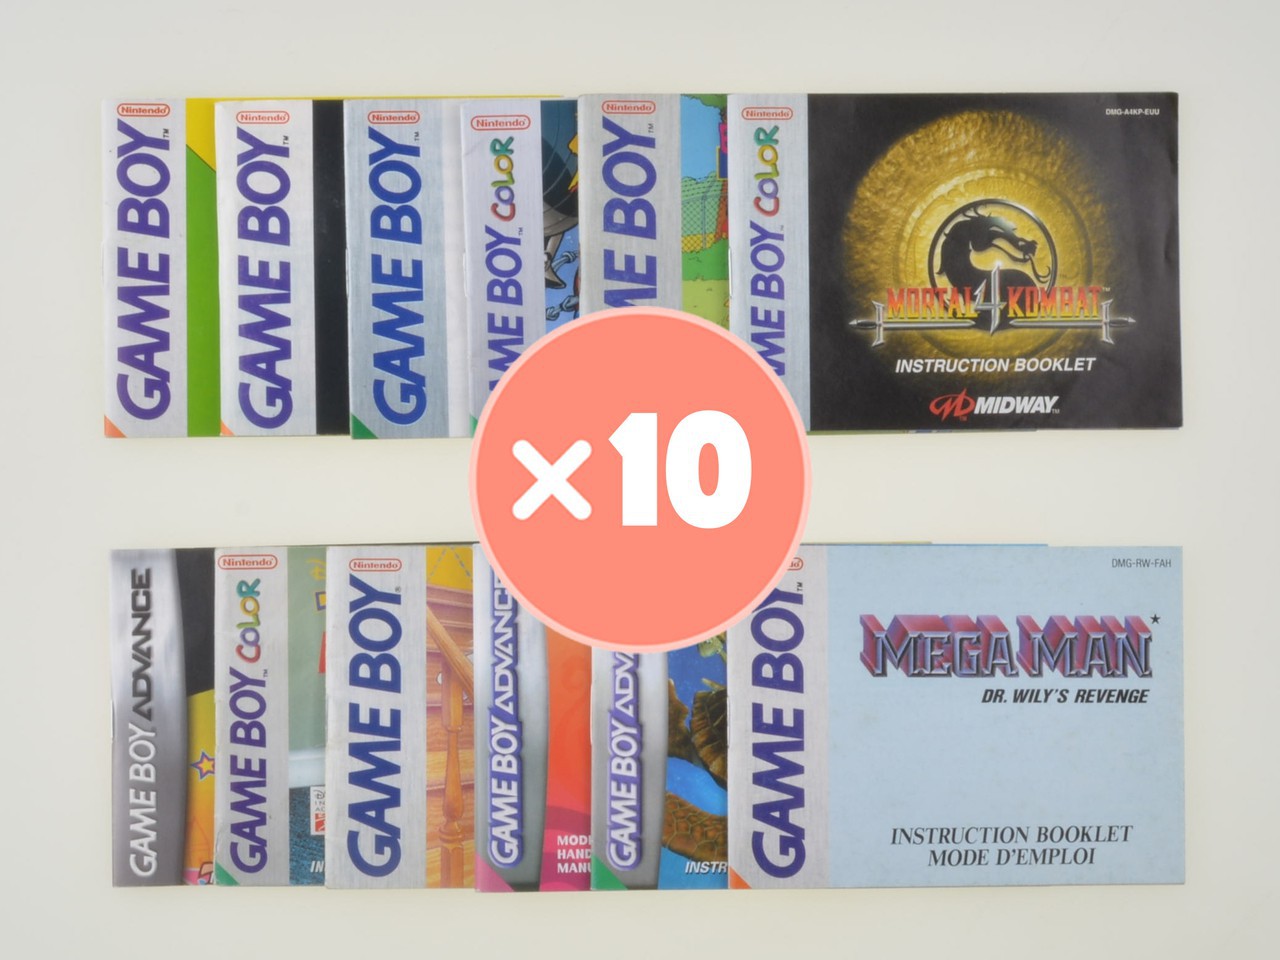 Mystery Manual Mix - Gameboy - 10x - Gameboy Classic Manuals